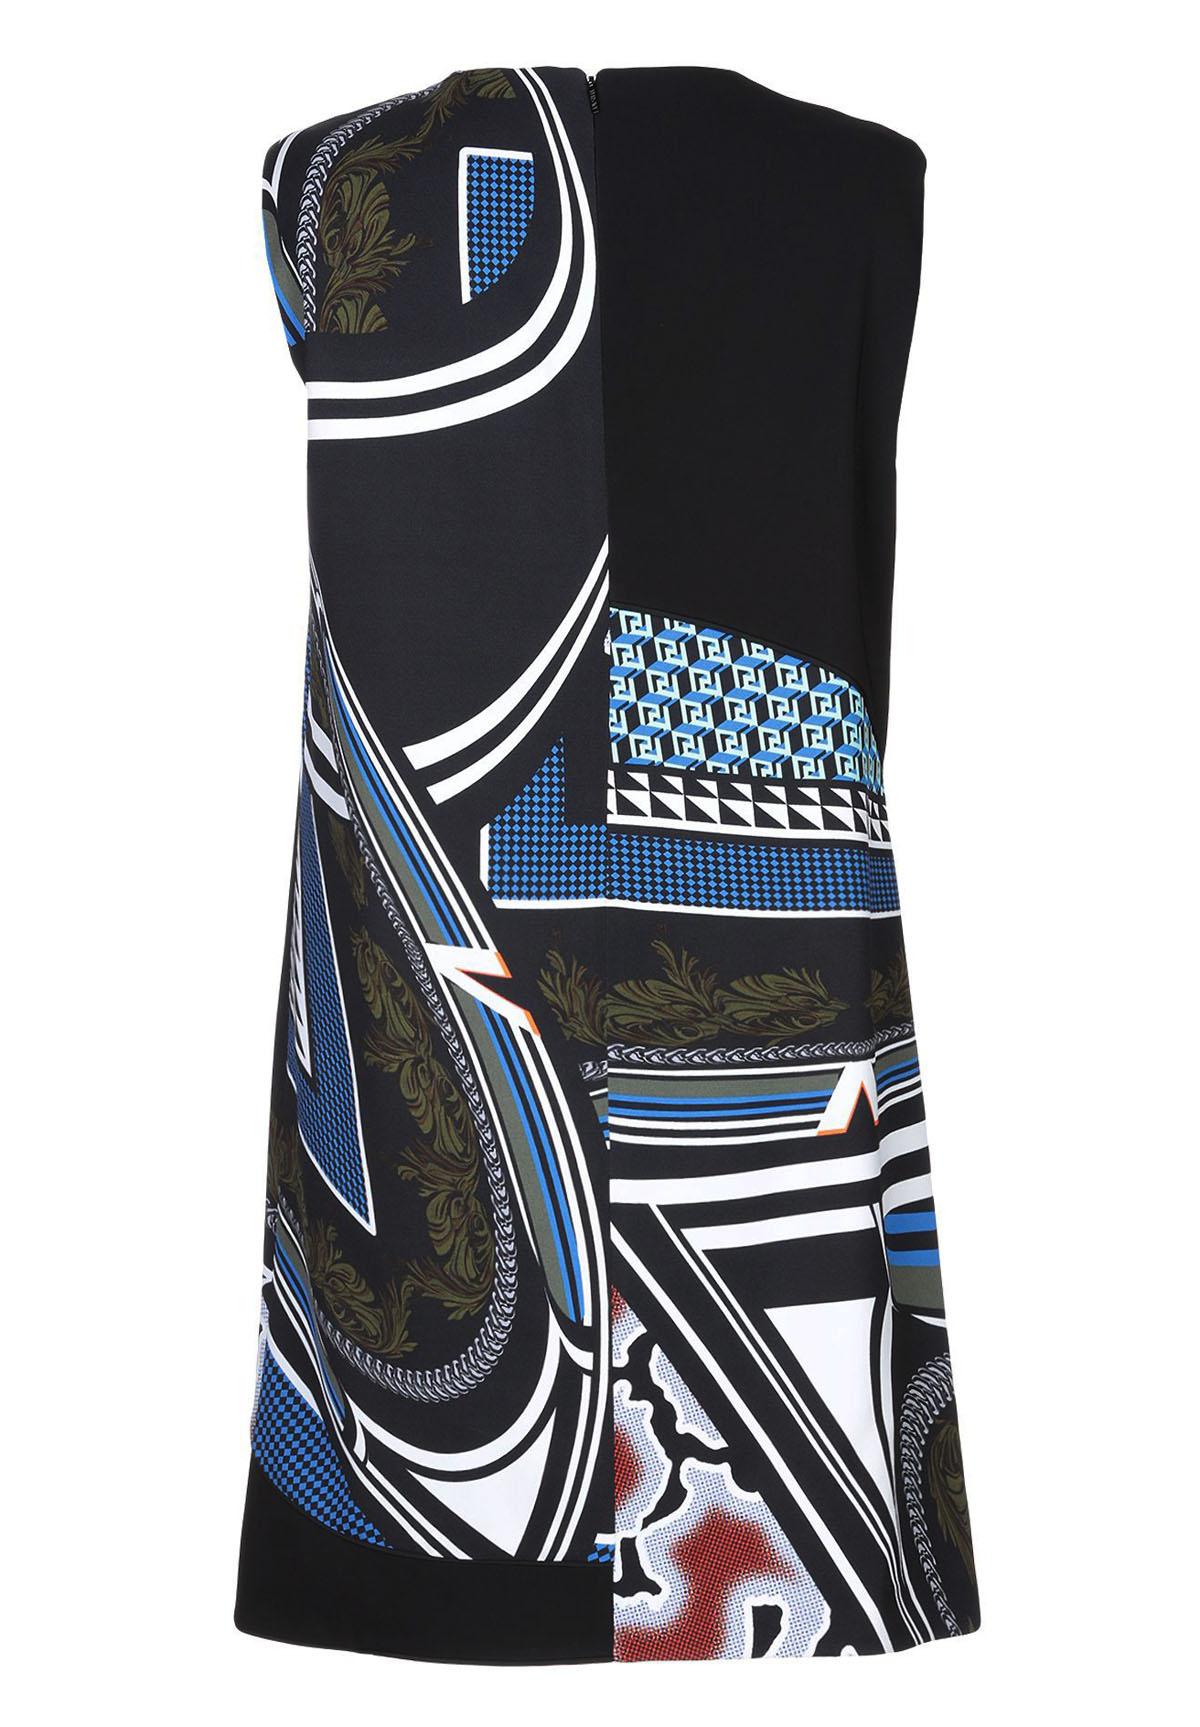 New Versace Multicolor Short Dress
Designer size 44
Designed for a comfortable fit, Multi-color Pattern, Round Collar, Sleeveless, No Pockets, Rear Zip Closure, Fully Lined, Trapeze Style.
Measurements: Length - 36 inches,  Bust - 38